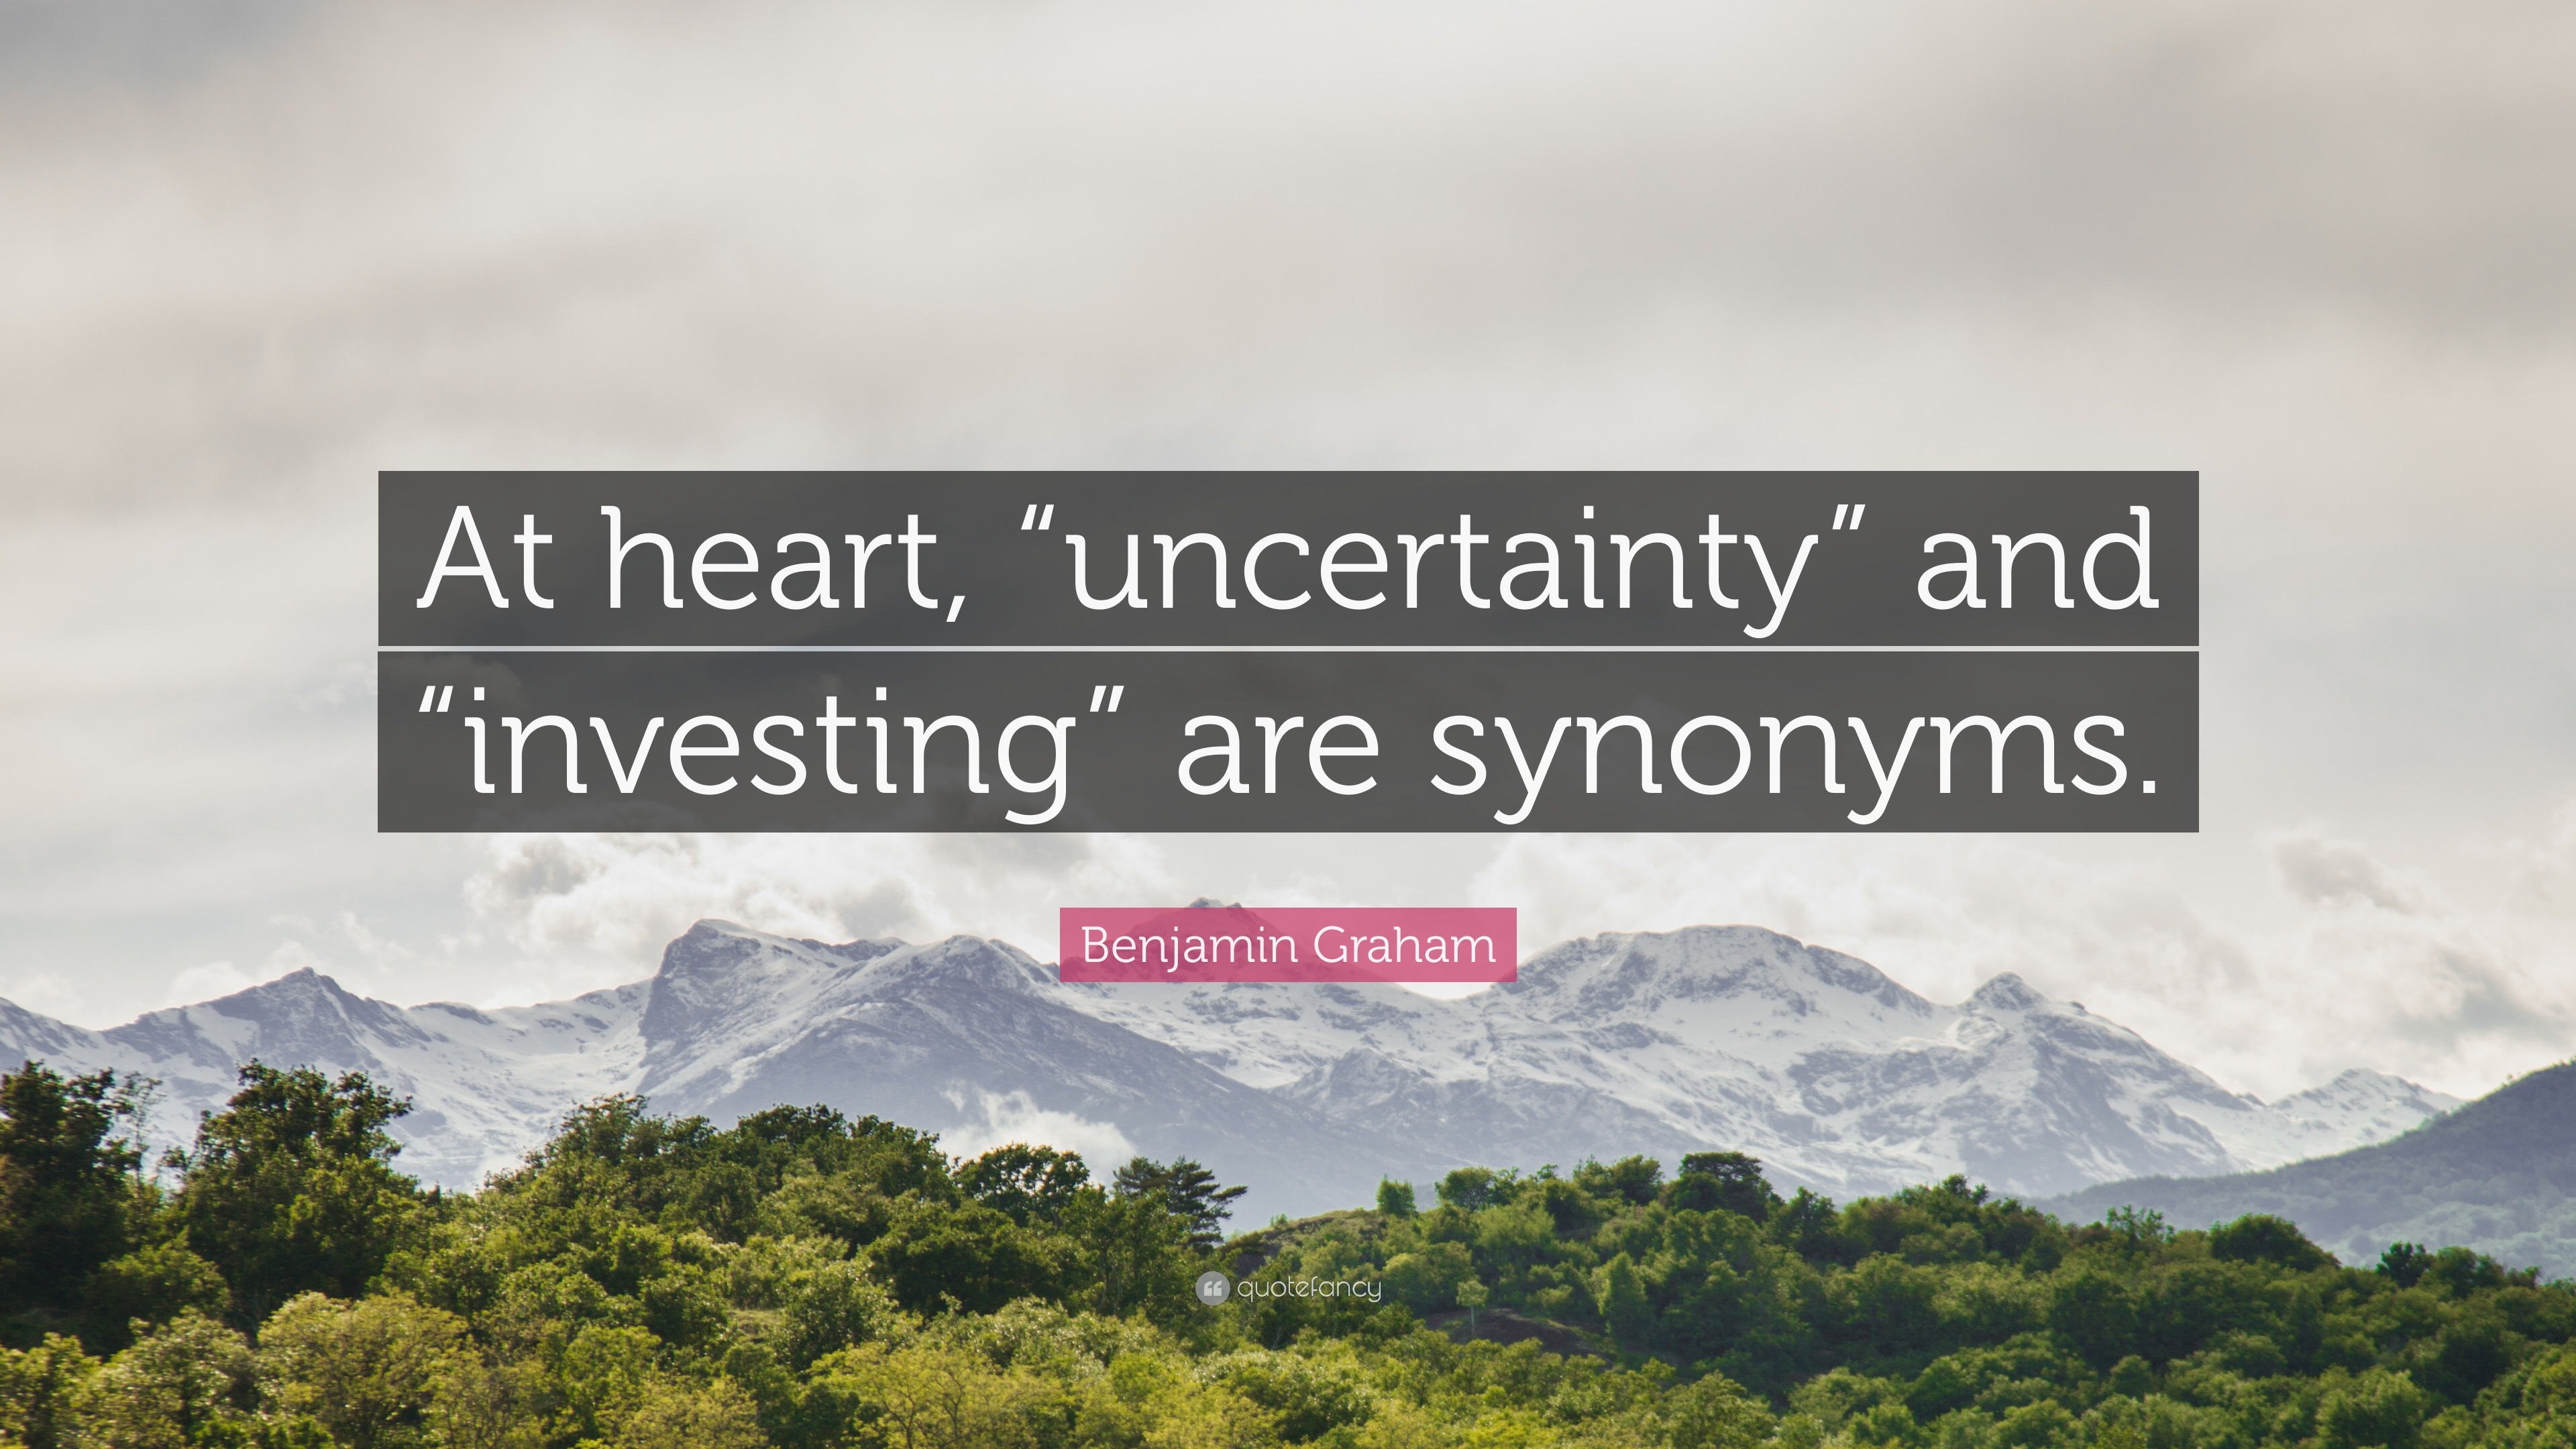 Benjamin Graham Quote: “At heart, “uncertainty” and “investing” are  synonyms.”